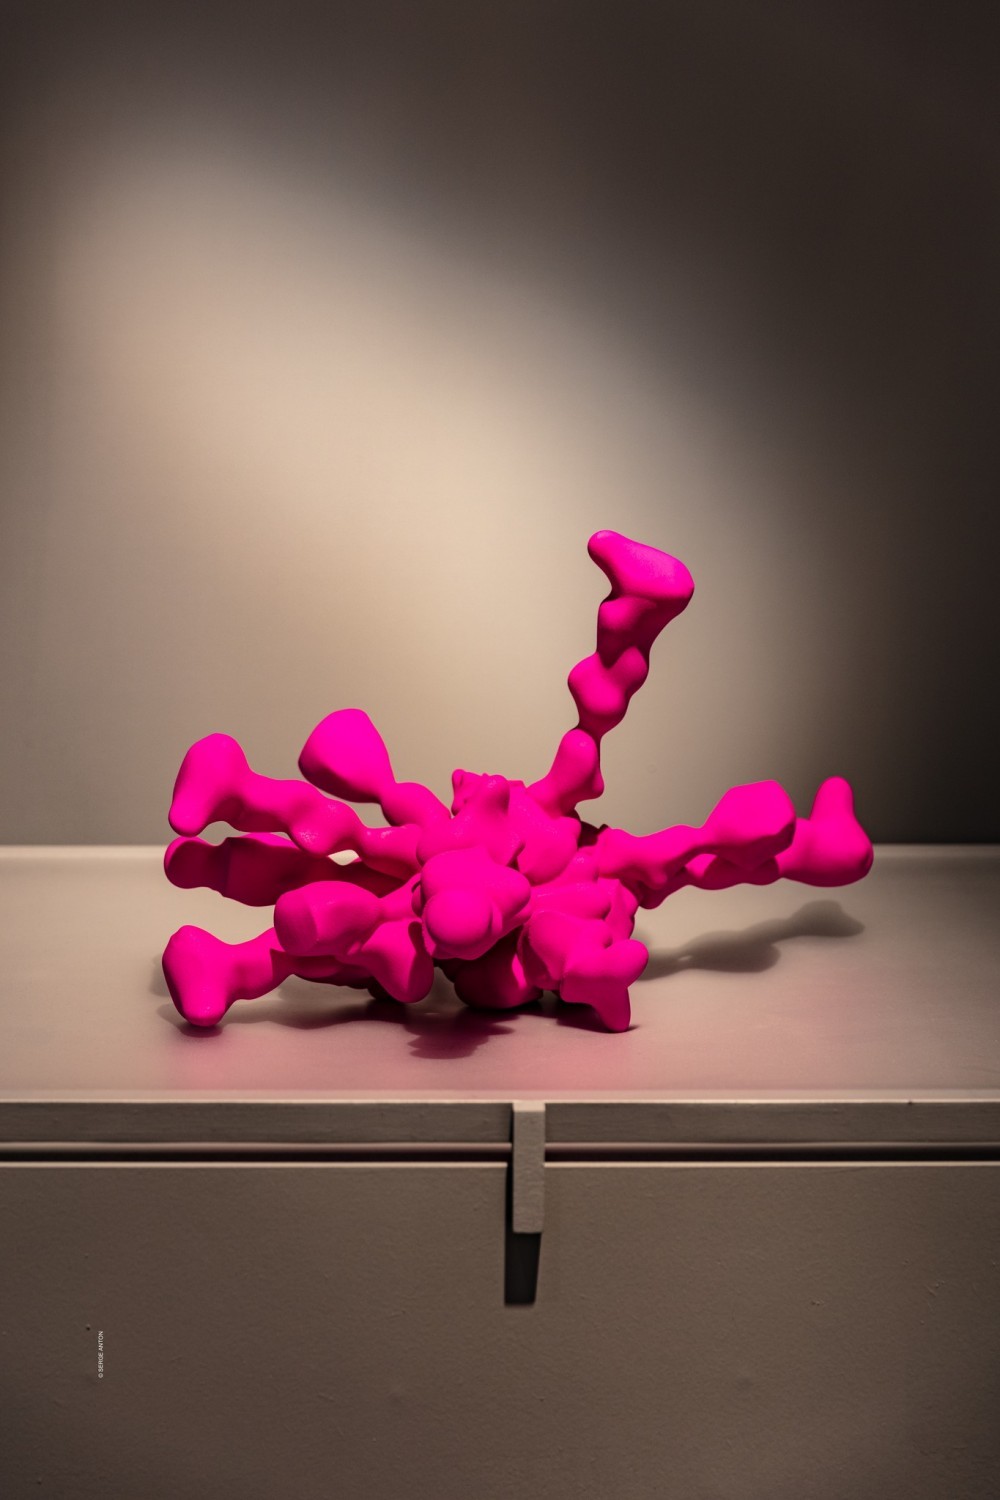 Laura Couto Rosado, Quantum Nuggets, 2017. 3D printing, resin, nylon sintering, powder coated paint. Installation view at CID Grand-Hornu. Photo by Serge Anton